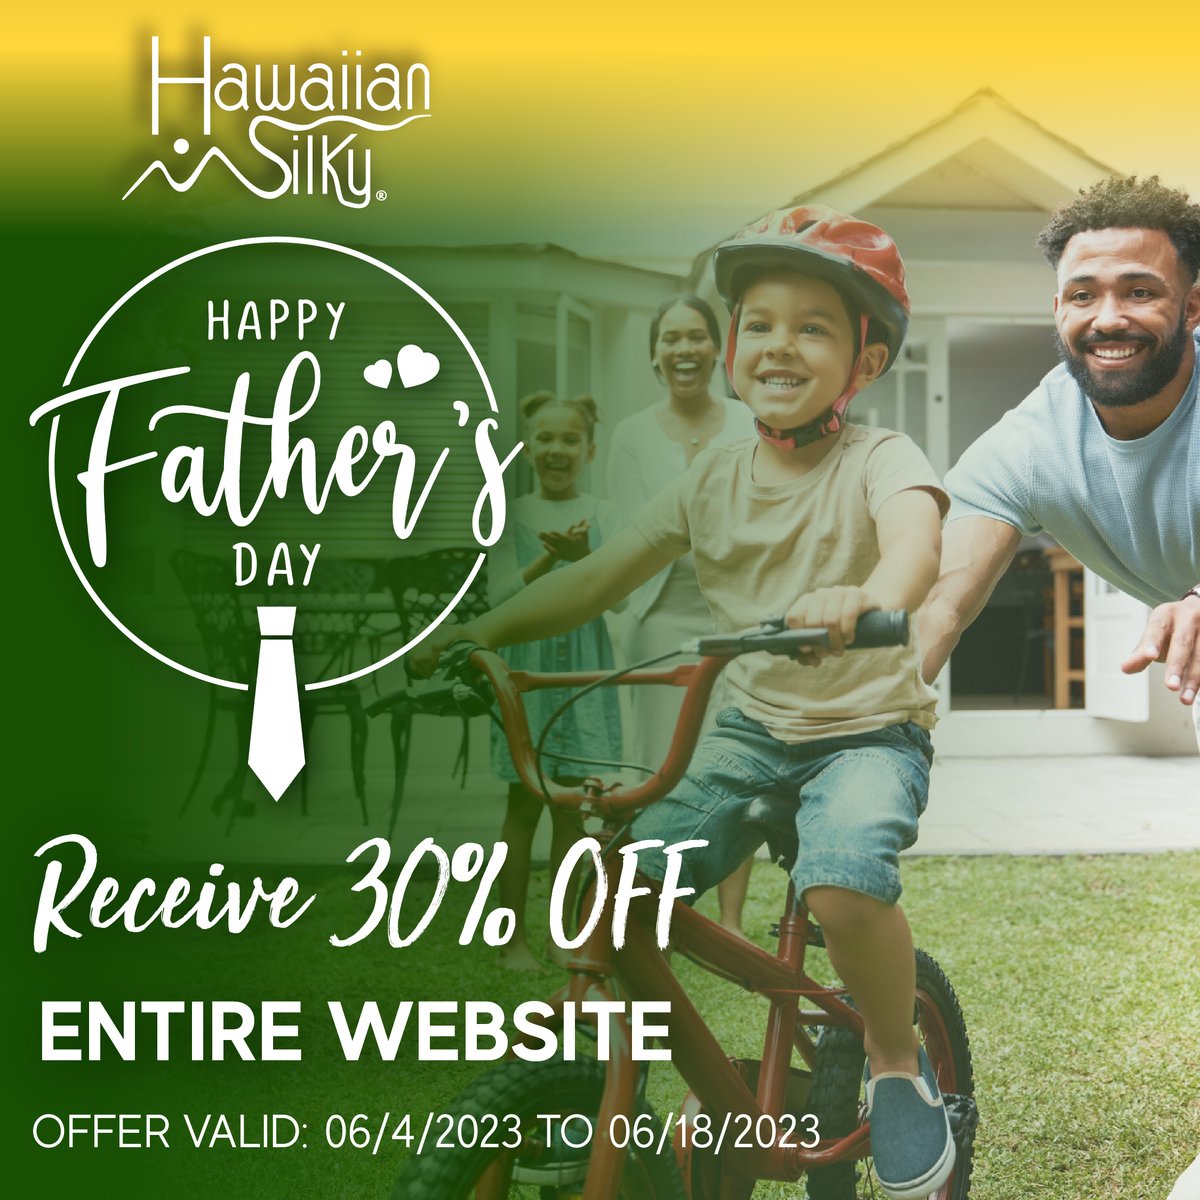 Fathers deserve love too! Take 30% off the entire website until June 18th! 💚
.
#Sale #FathersDay #FathersDaySale #FathersDayGift #naturalhaircare #curls #curlyhair #kinkyhair #wavyhair #coilyhair #blackfathers #blackdads #dadgang #mensgrooming